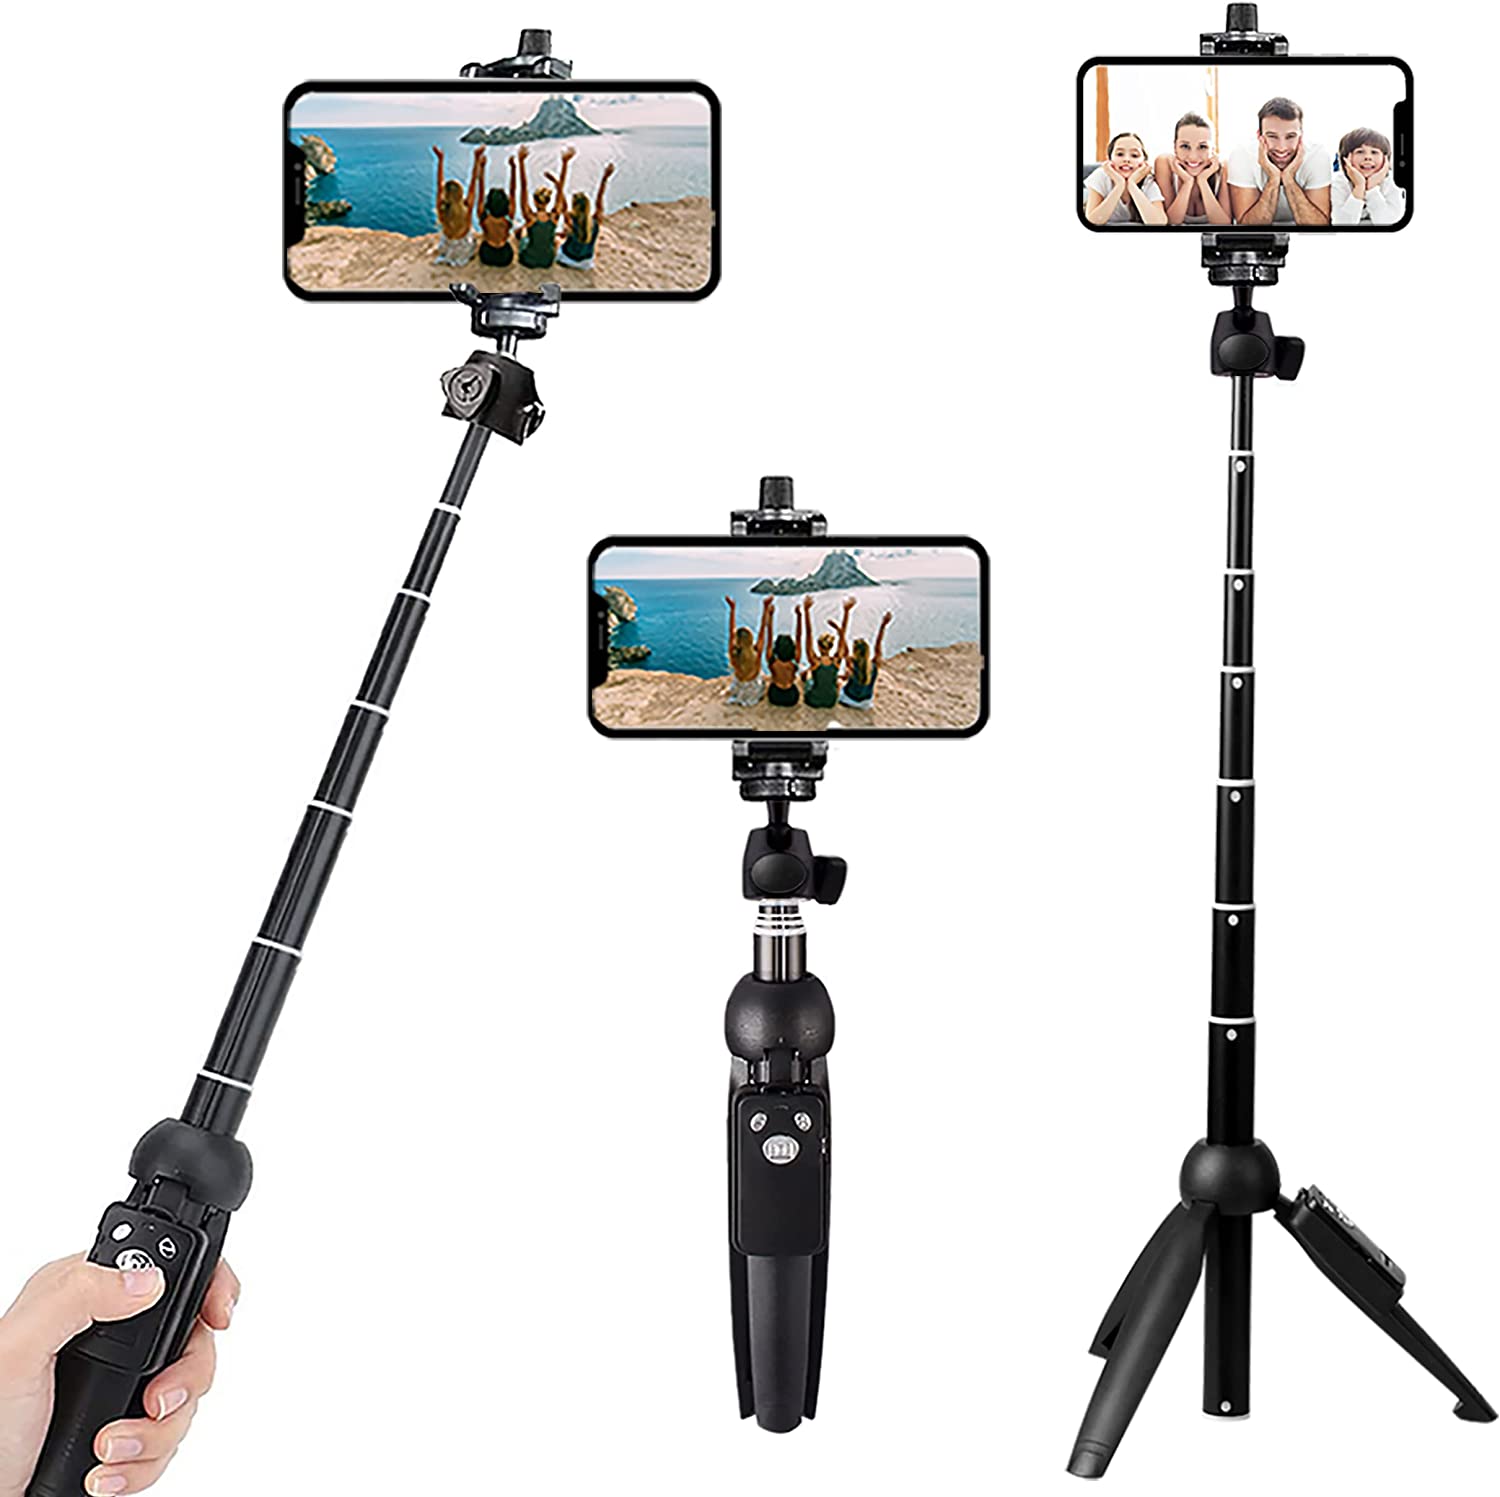 Bluehorn Foldable Rechargeable Remote Selfie Stick, 40-Inch